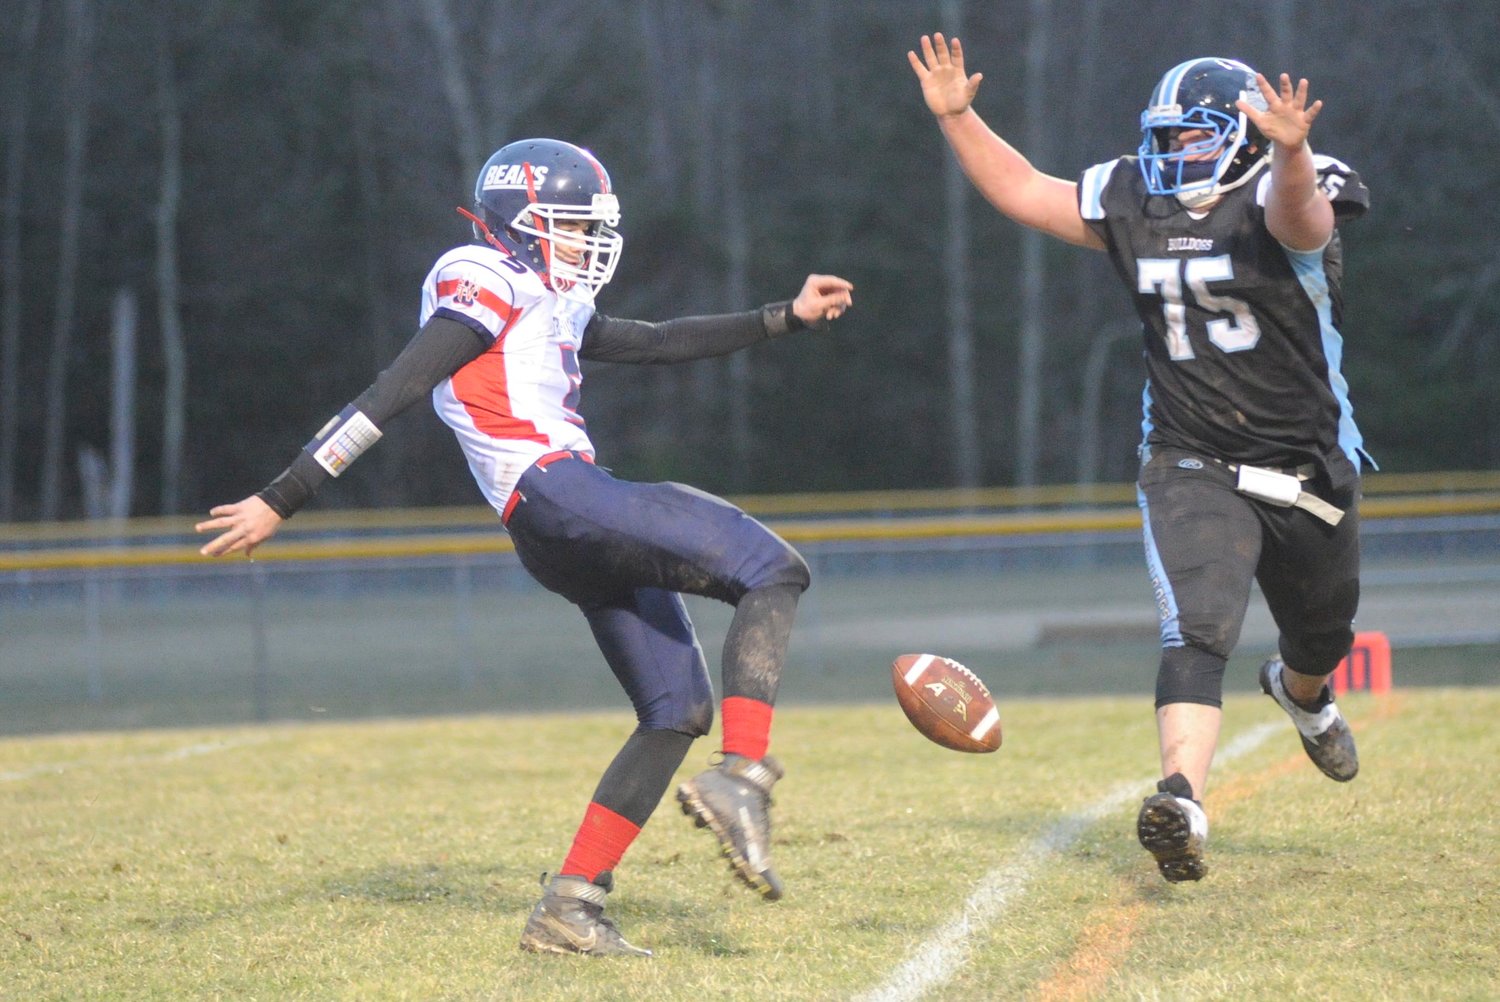 A close call. Sullivan West’s Chris Campenelli nearly blocked a punt by Bears Thomas Lynch.